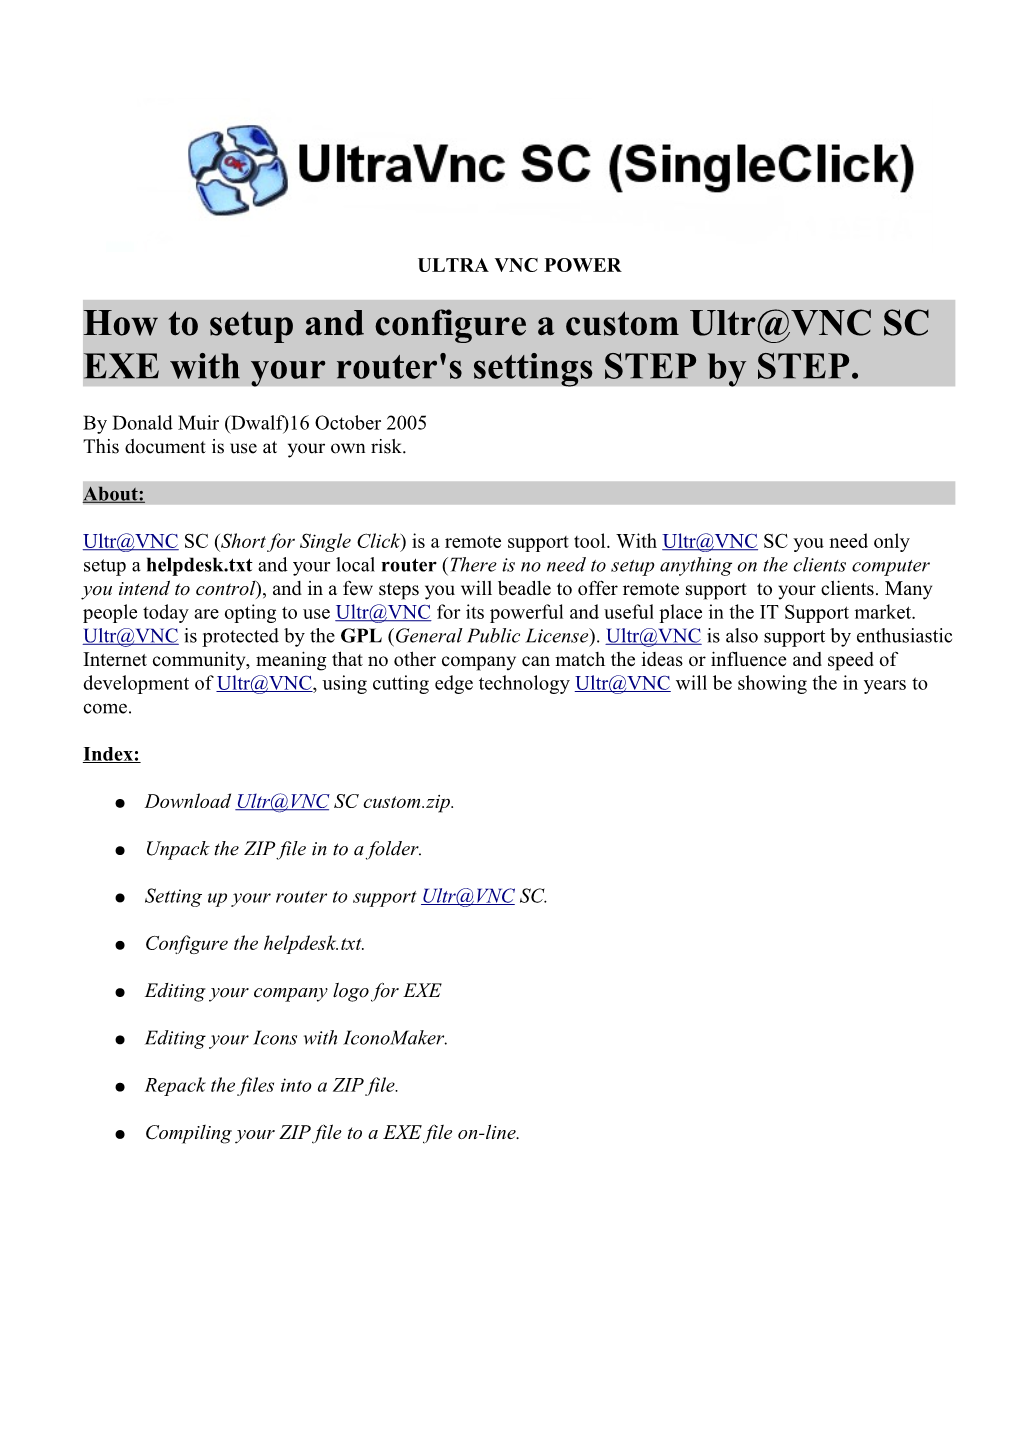 How to Setup and Configure a Custom Ultr VNC SC EXE with Your Router's Settings STEP by STEP